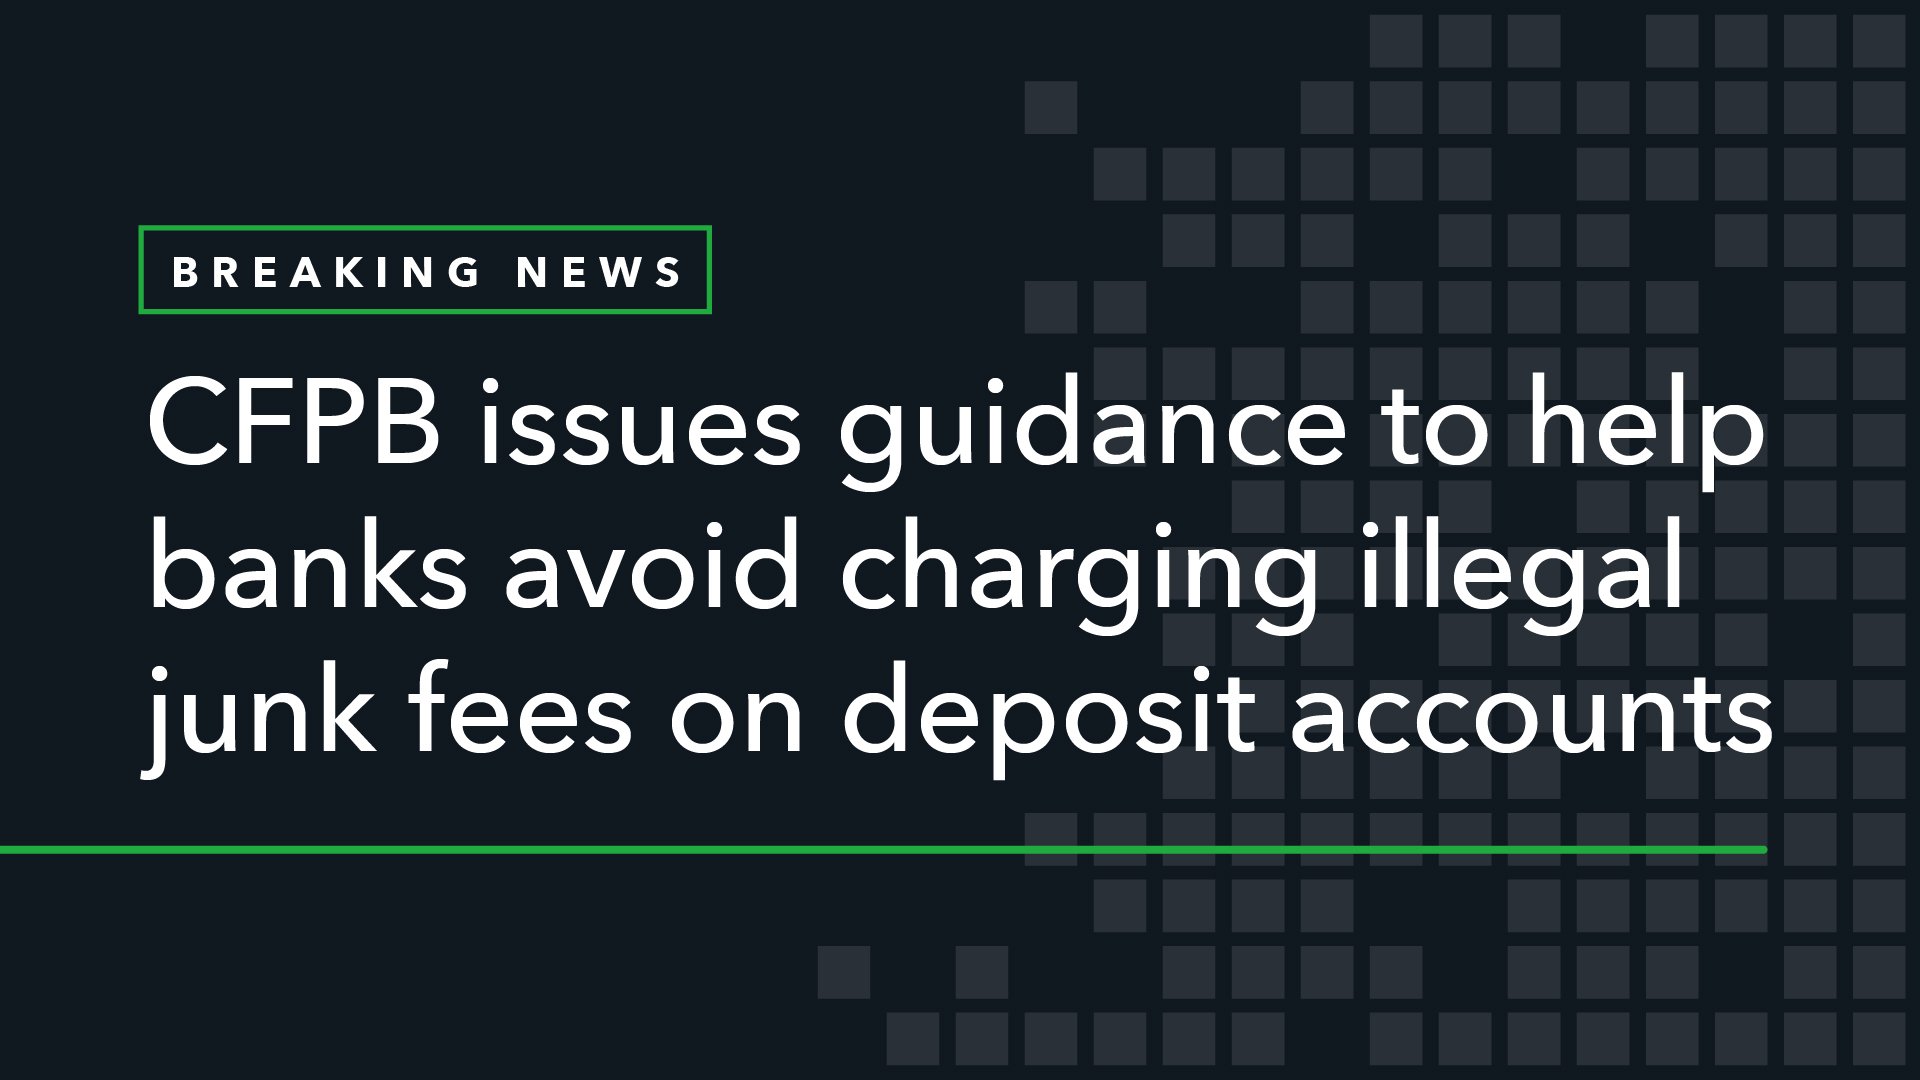 CFPB Issues Guidance to Help Banks Avoid Charging Illegal Junk Fees on Deposit Accounts